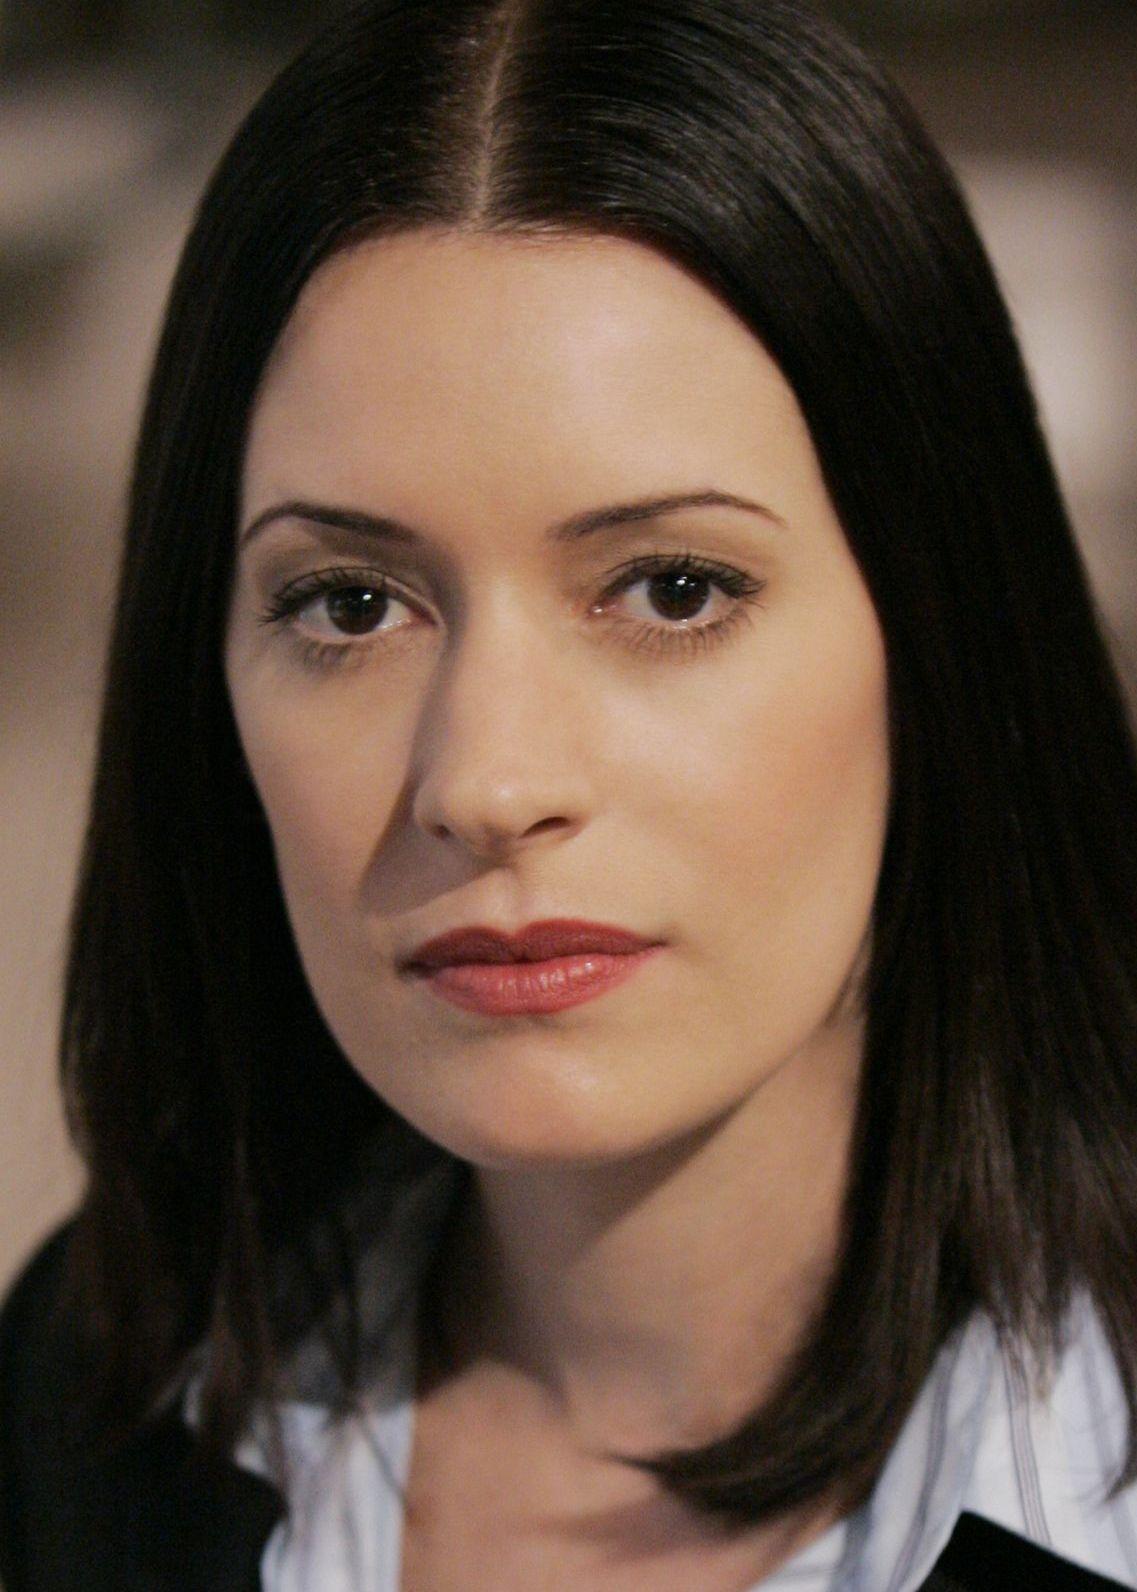 70+ Hot Pictures Of Paget Brewster From Criminal Minds Will Brighten Up Your Day 141